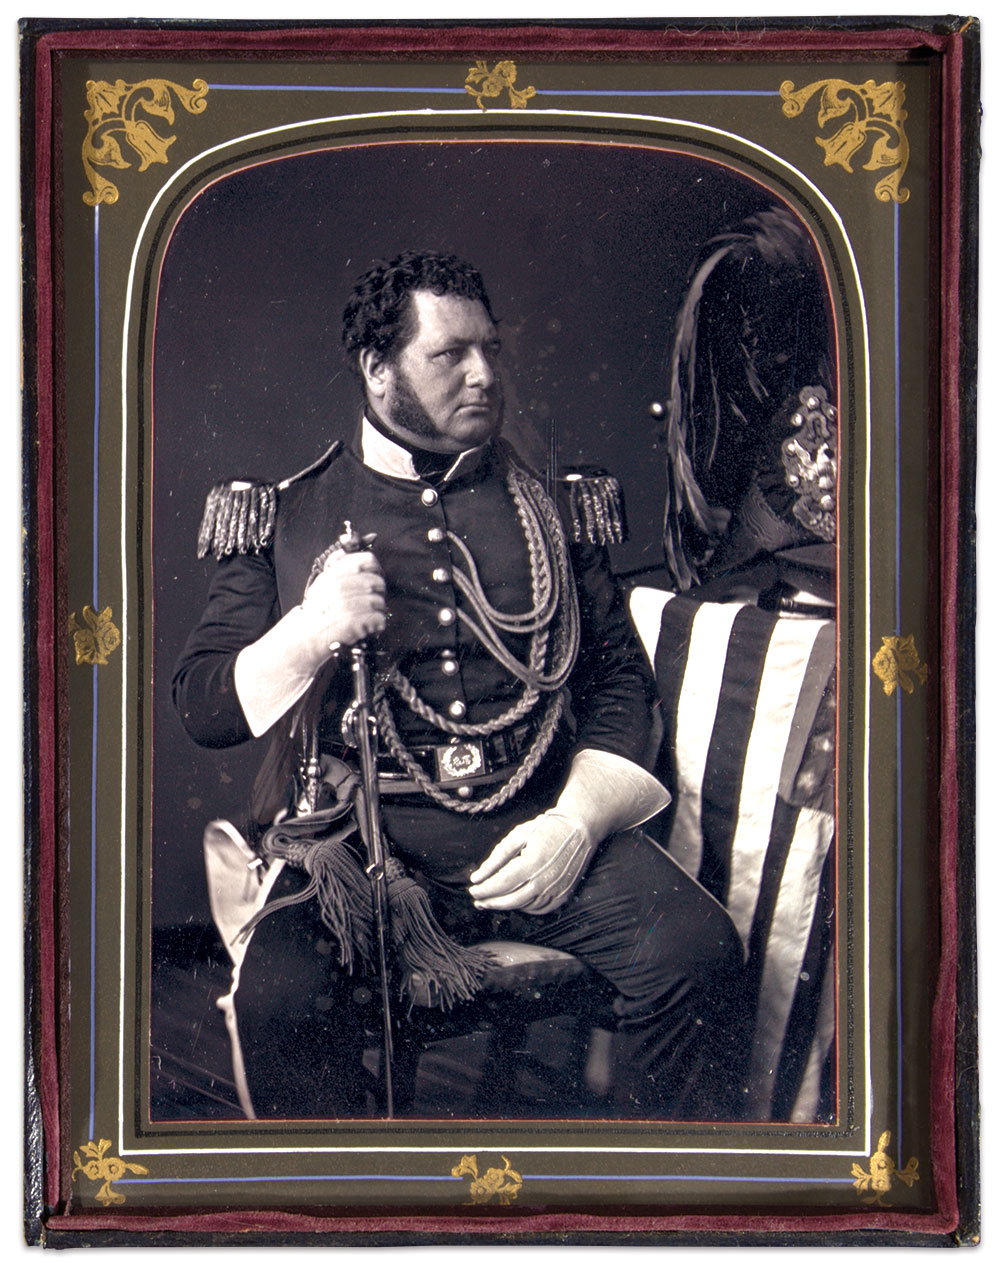 IMPECCABLY ATTIRED: This militia officer ranks as a captain based on the width of his bullion epaulets and single-breasted coat, a variation of the 1847 dress coatee. The twisted gold cord aiguillette fastened under his epaulet strap and draped across his chest indicate he is an aide-de-camp, as does the plumed chapeau on the table (note the Type 2 Pattern 1839 forage cap beside the chapeau). The trim on his collar (and cuffs hidden from view by his gauntlets) and welts on his trouser seams might indicate infantry. The waist belt plate appears to be the 1832 pattern US style. The shine of the belt suggests patent leather, and the two stripes that run the length of the belt are unusual. Also atypical is his sword and scabbard, which appear to have elements of the 1834 general officer and 1840 foot officer models. —Mike Cunningham, Ron Field and Ron Maness. Full-plate daguerreotype by Marcus A. Root of Philadelphia, Pa. Author’s collection.